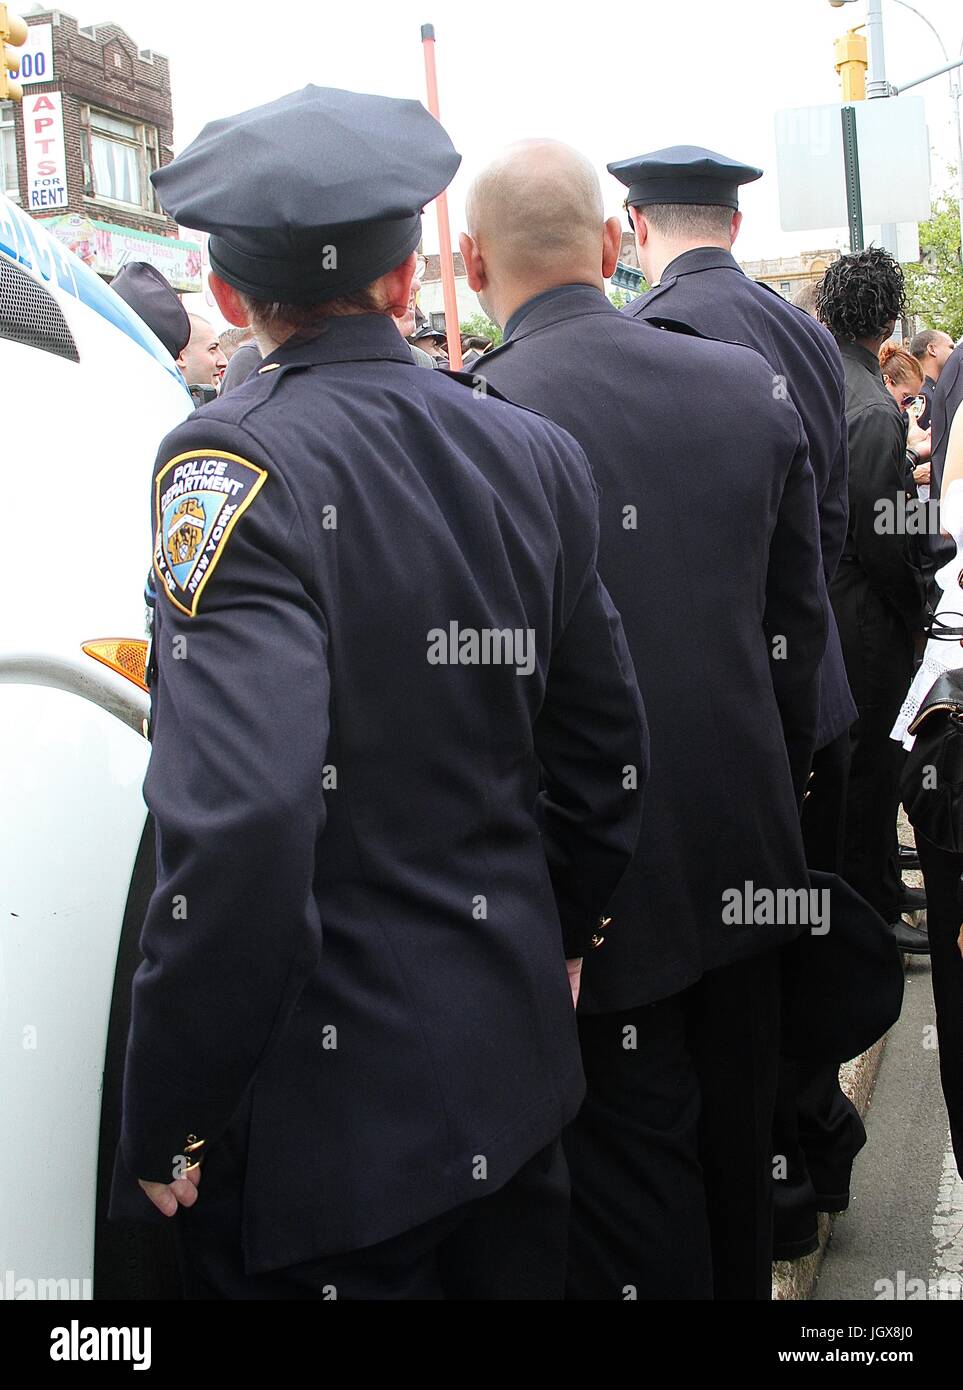 New York, NY, USA. 11th July, 2017. New York City Department police officers turning the backs while New York City Mayor Bill de Blasio speaks at the funeral of slain New York City Police Officer Miosotis Familia held at World Changers Church New York in Bronx, New York on July 11, 2017. Credit: Rainmaker Photo/Media Punch/Alamy Live News Stock Photo